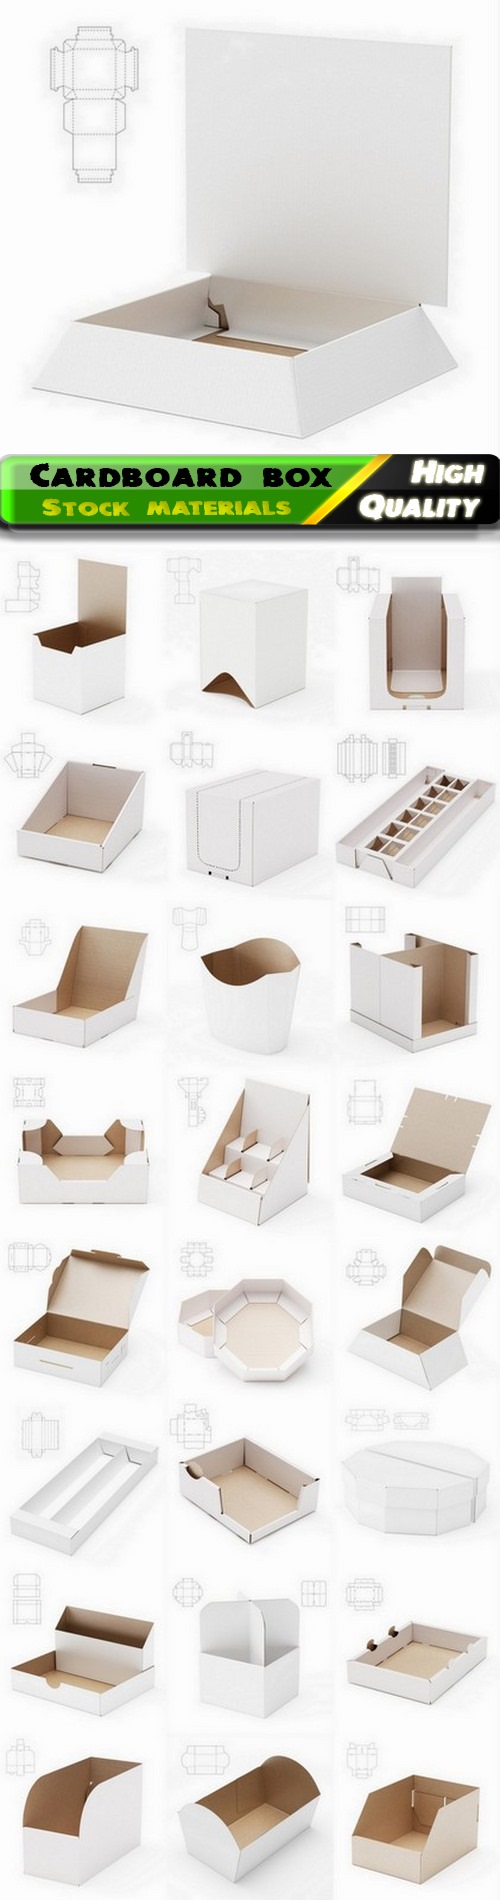 Design of cardboard box and package with drawing for cutting 2 - 25 HQ Jpg